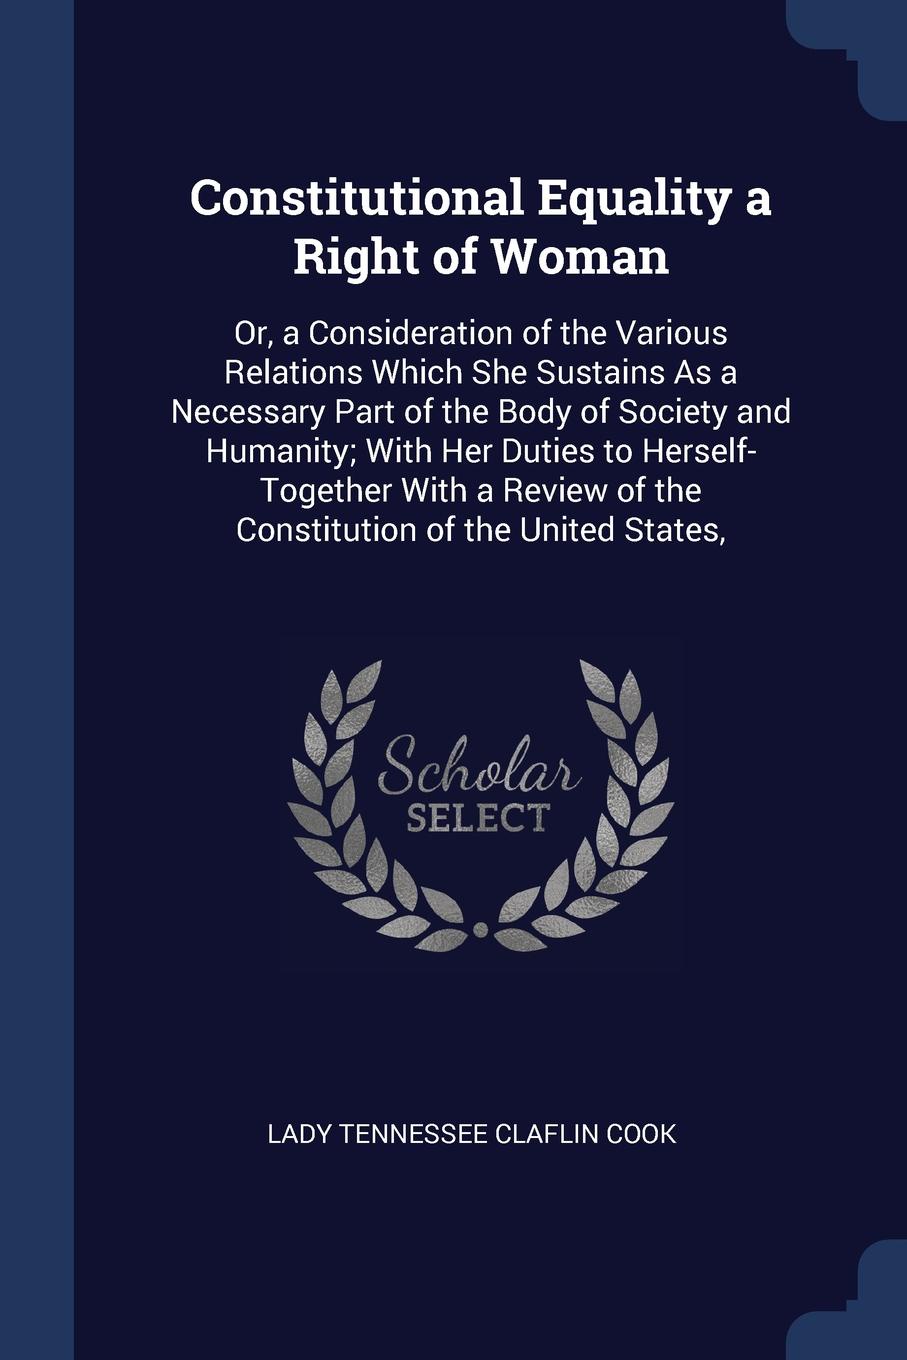 Constitutional Equality a Right of Woman. Or, a Consideration of the Various Relations Which She Sustains As a Necessary Part of the Body of Society and Humanity; With Her Duties to Herself-Together With a Review of the Constitution of the United ...